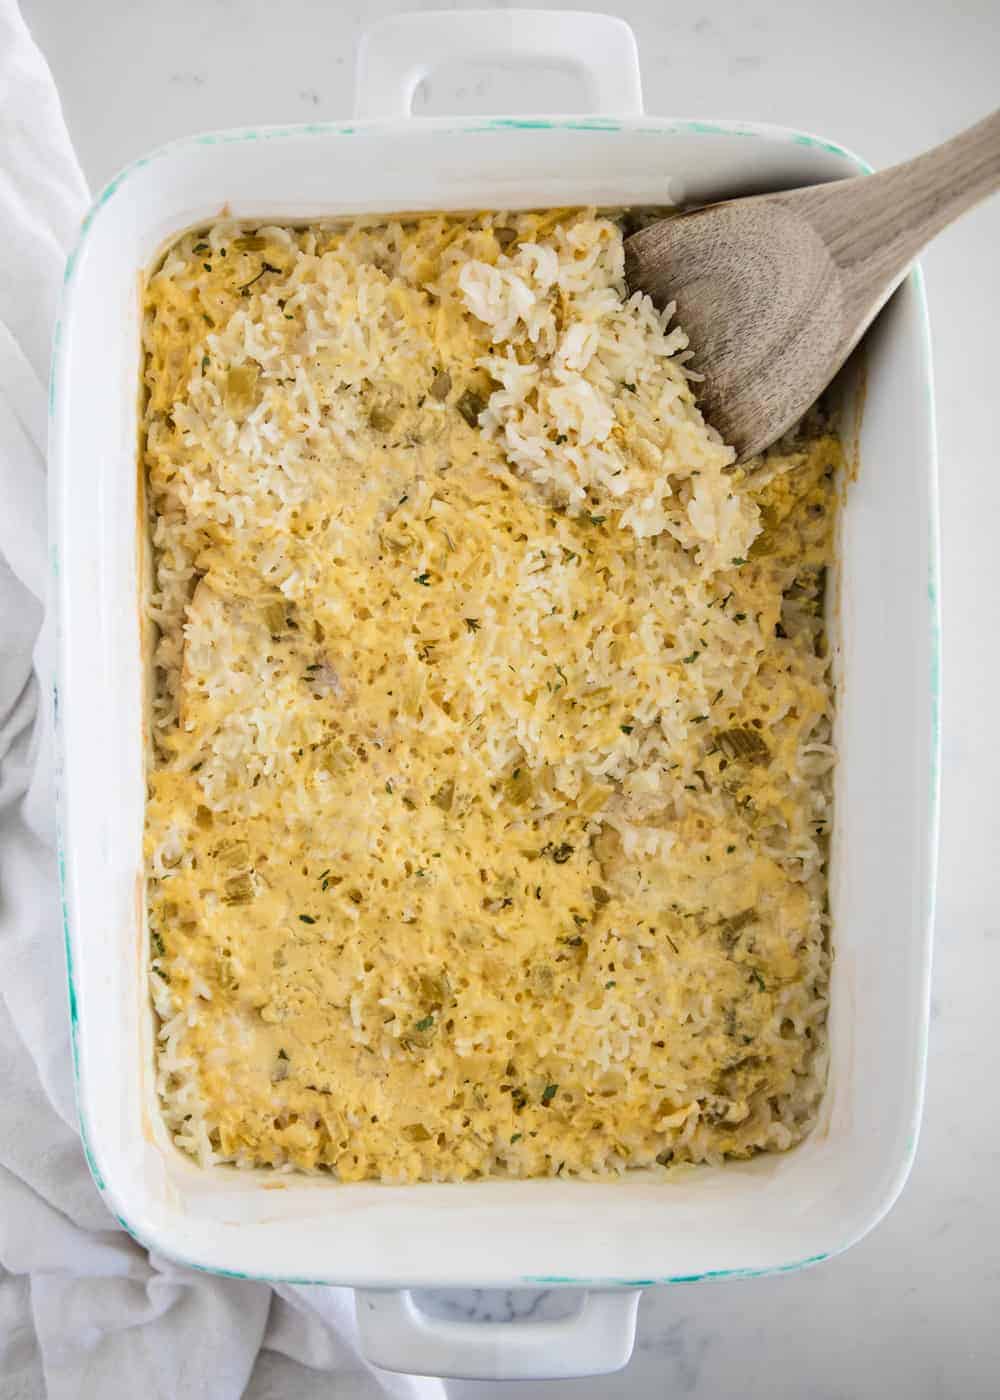 Chicken and rice casserole in pan.